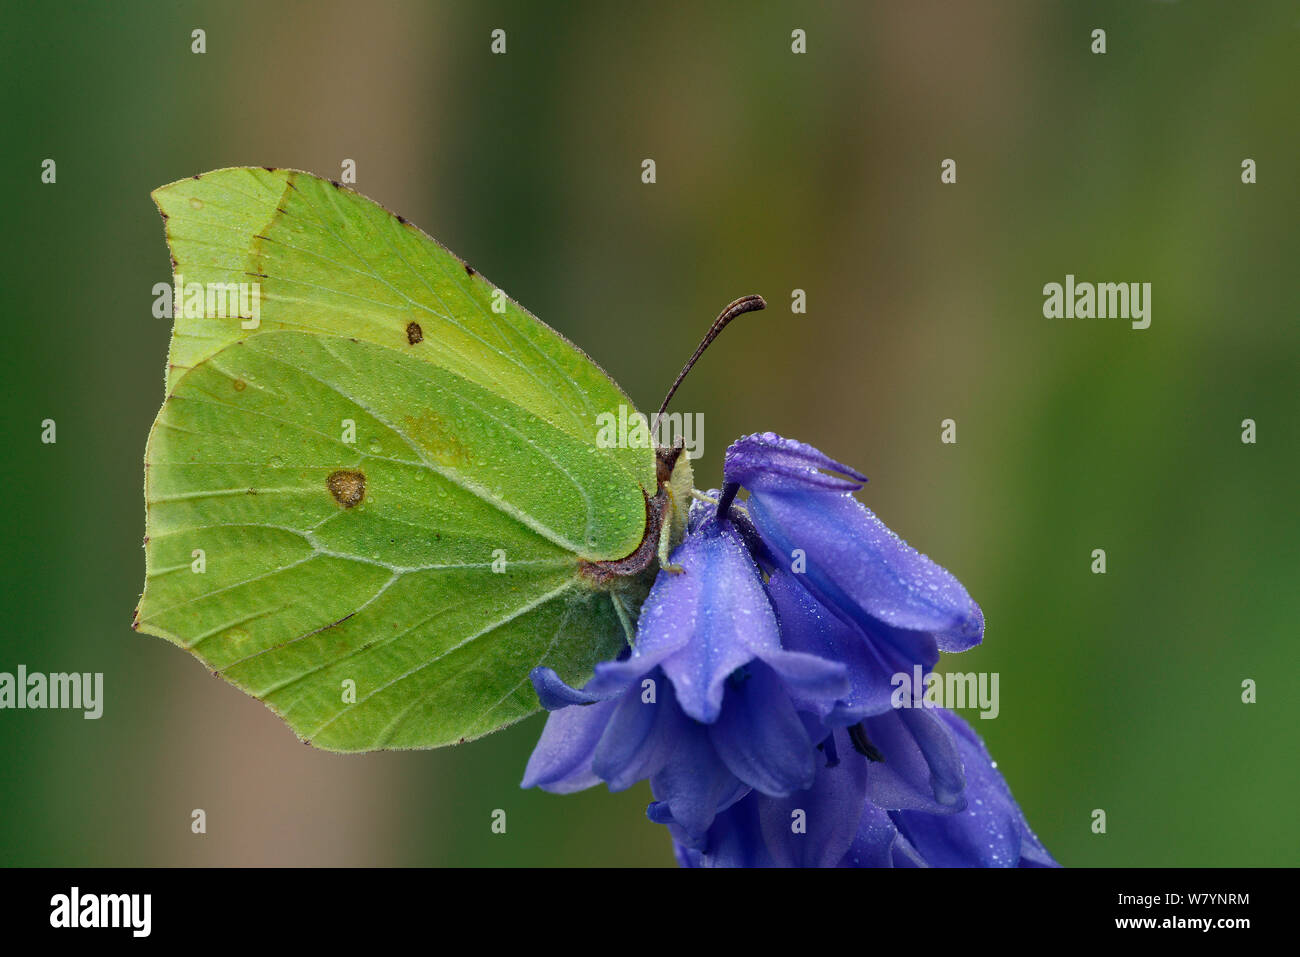 Brimstone butterfly (Gonepteryx rhamni) male perched on Bluebell flower (Hyacinthoides non-scripta) with early morning dew, Hertfordshire, England, UK. May Stock Photo